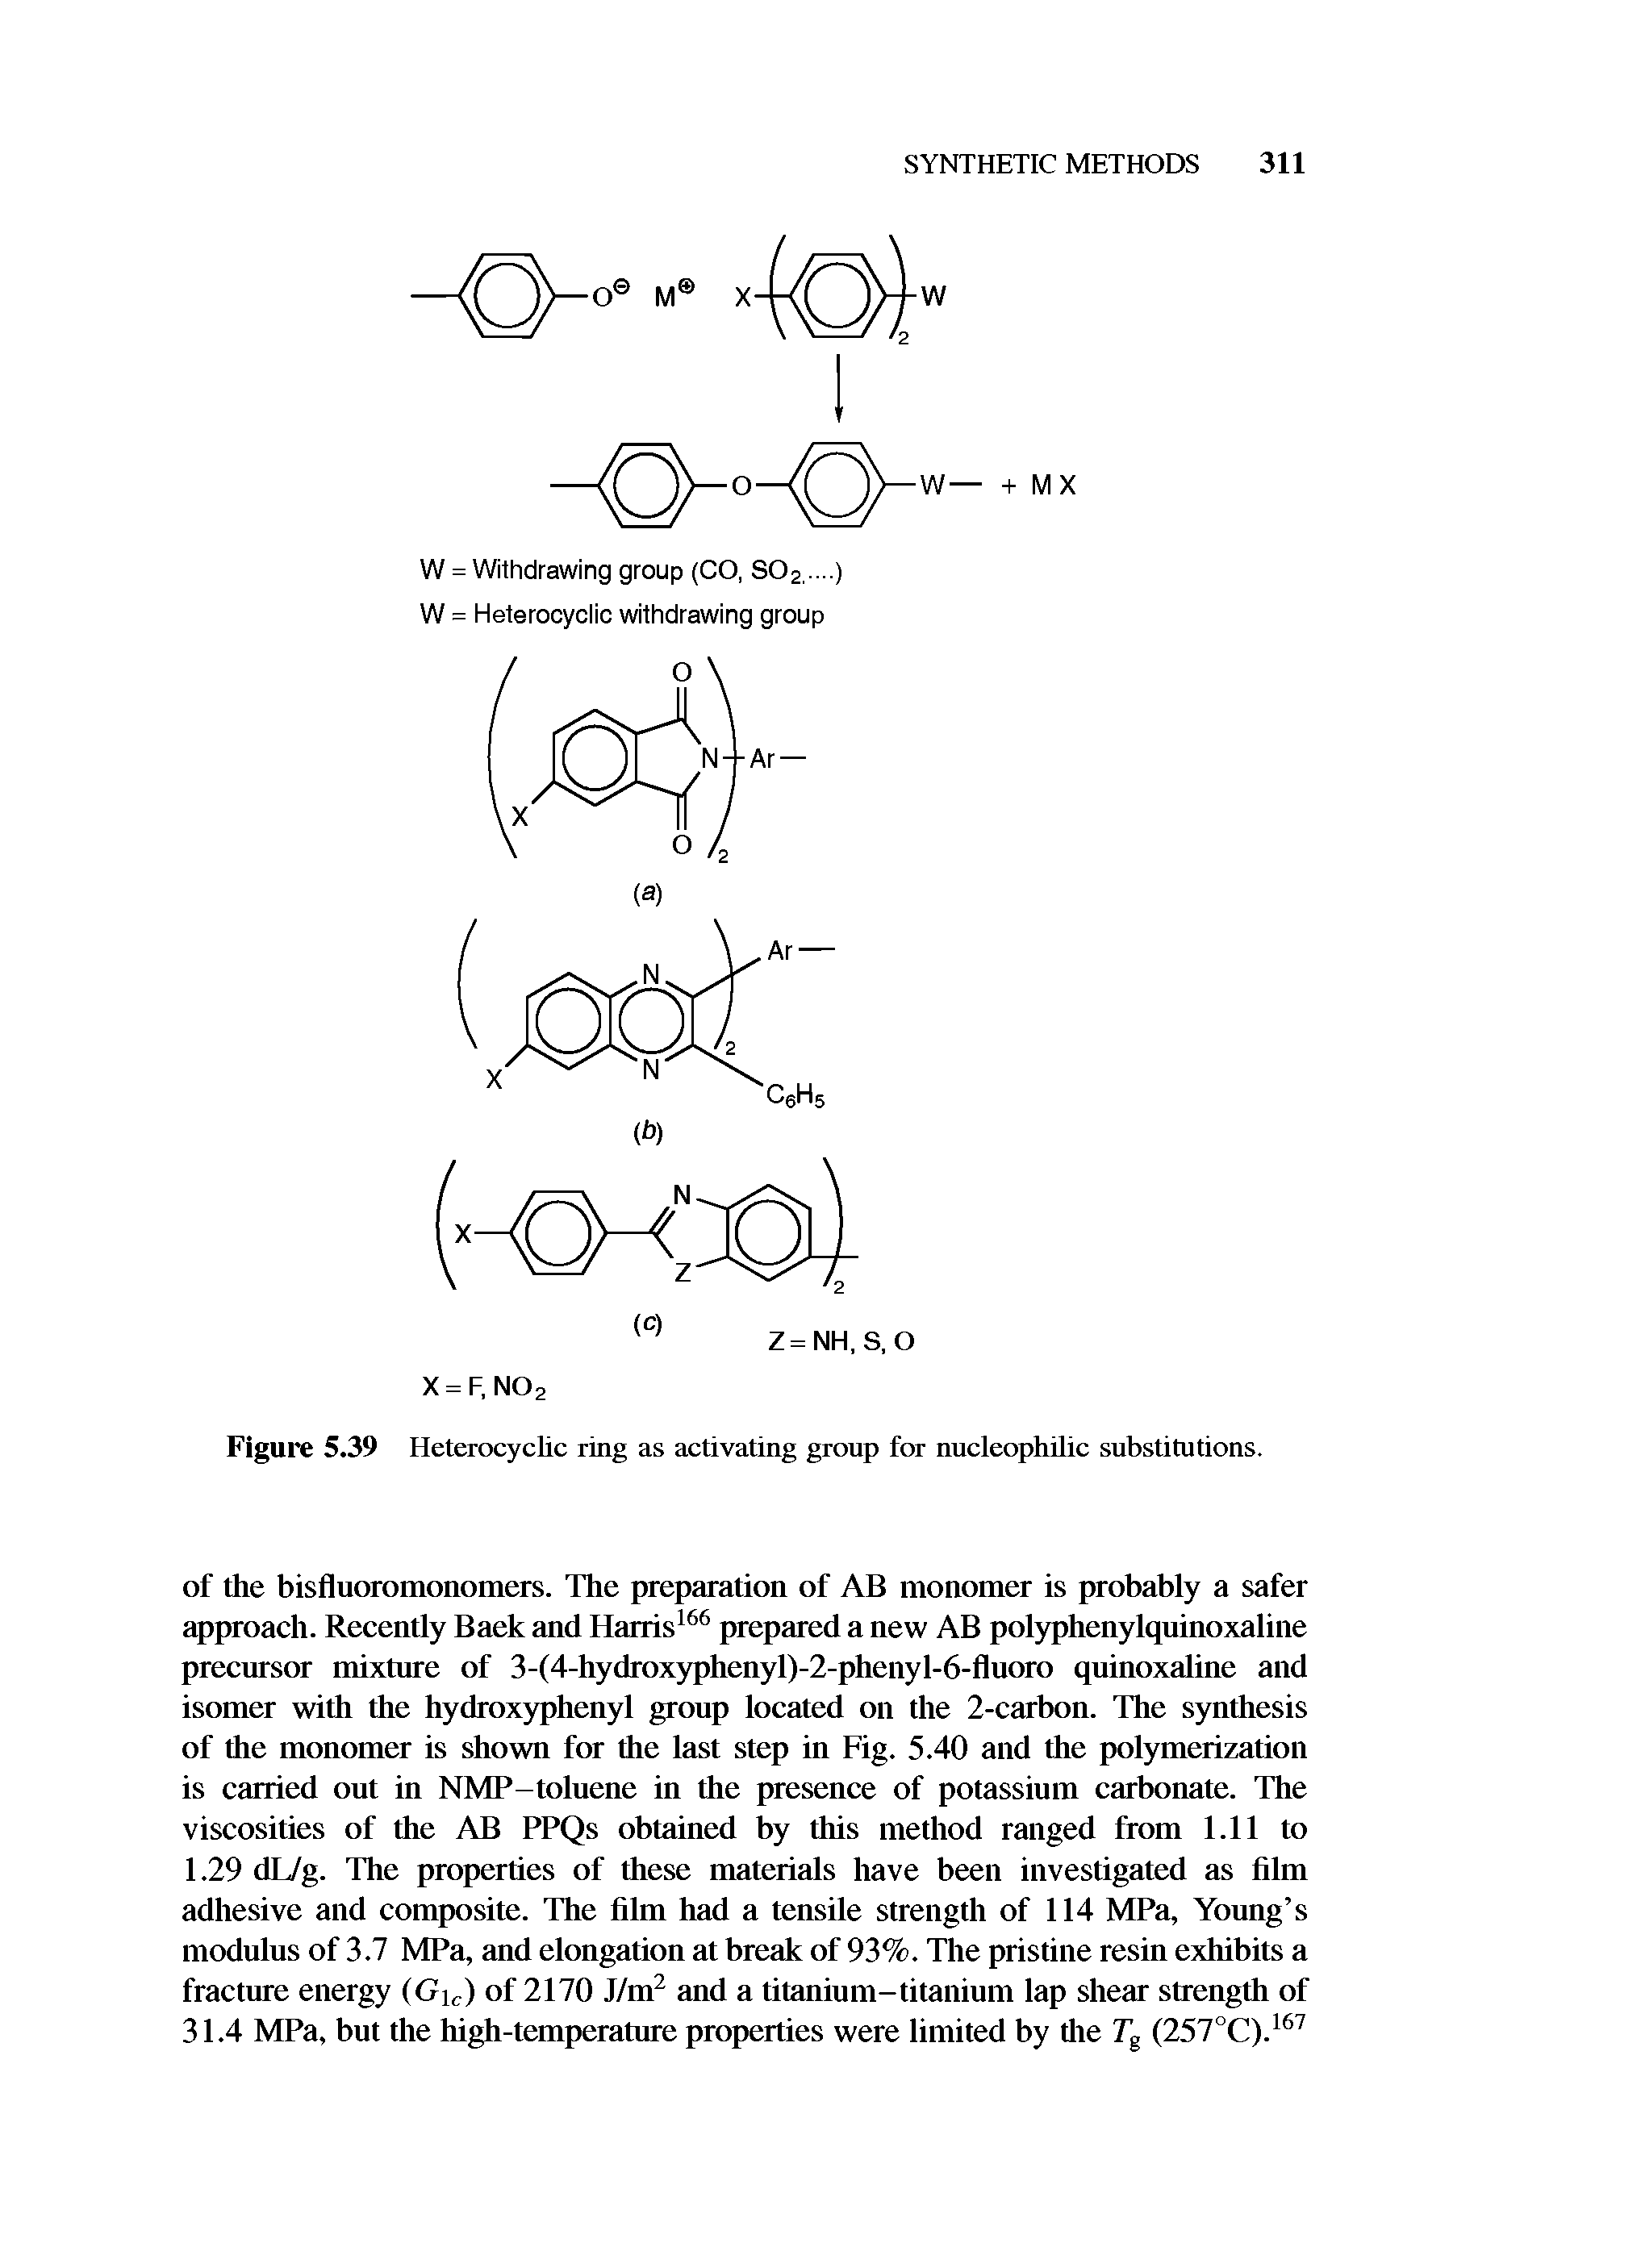 Figure 5.39 Heterocyclic ring as activating group for nucleophilic substitutions.